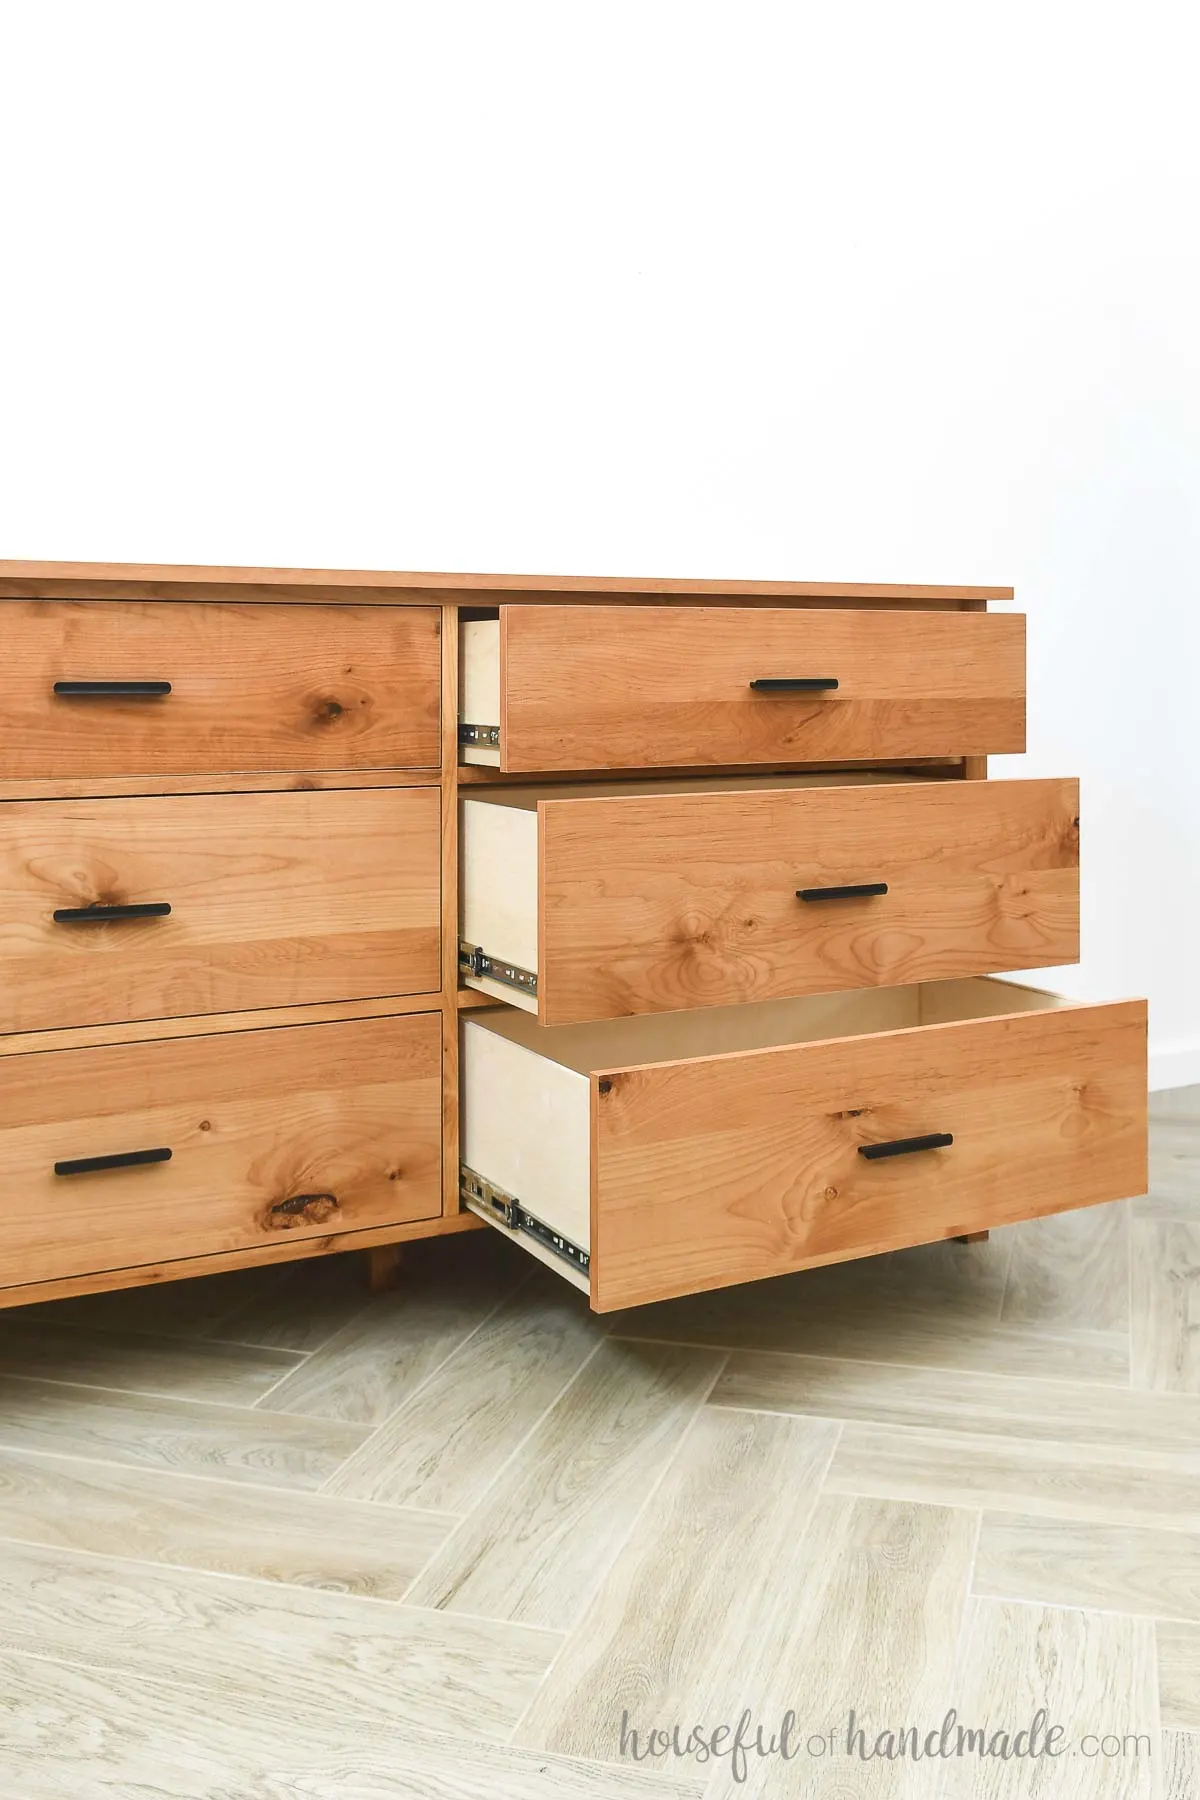 Six drawer dresser with three drawers on one side all opened showing the large drawer boxes. 